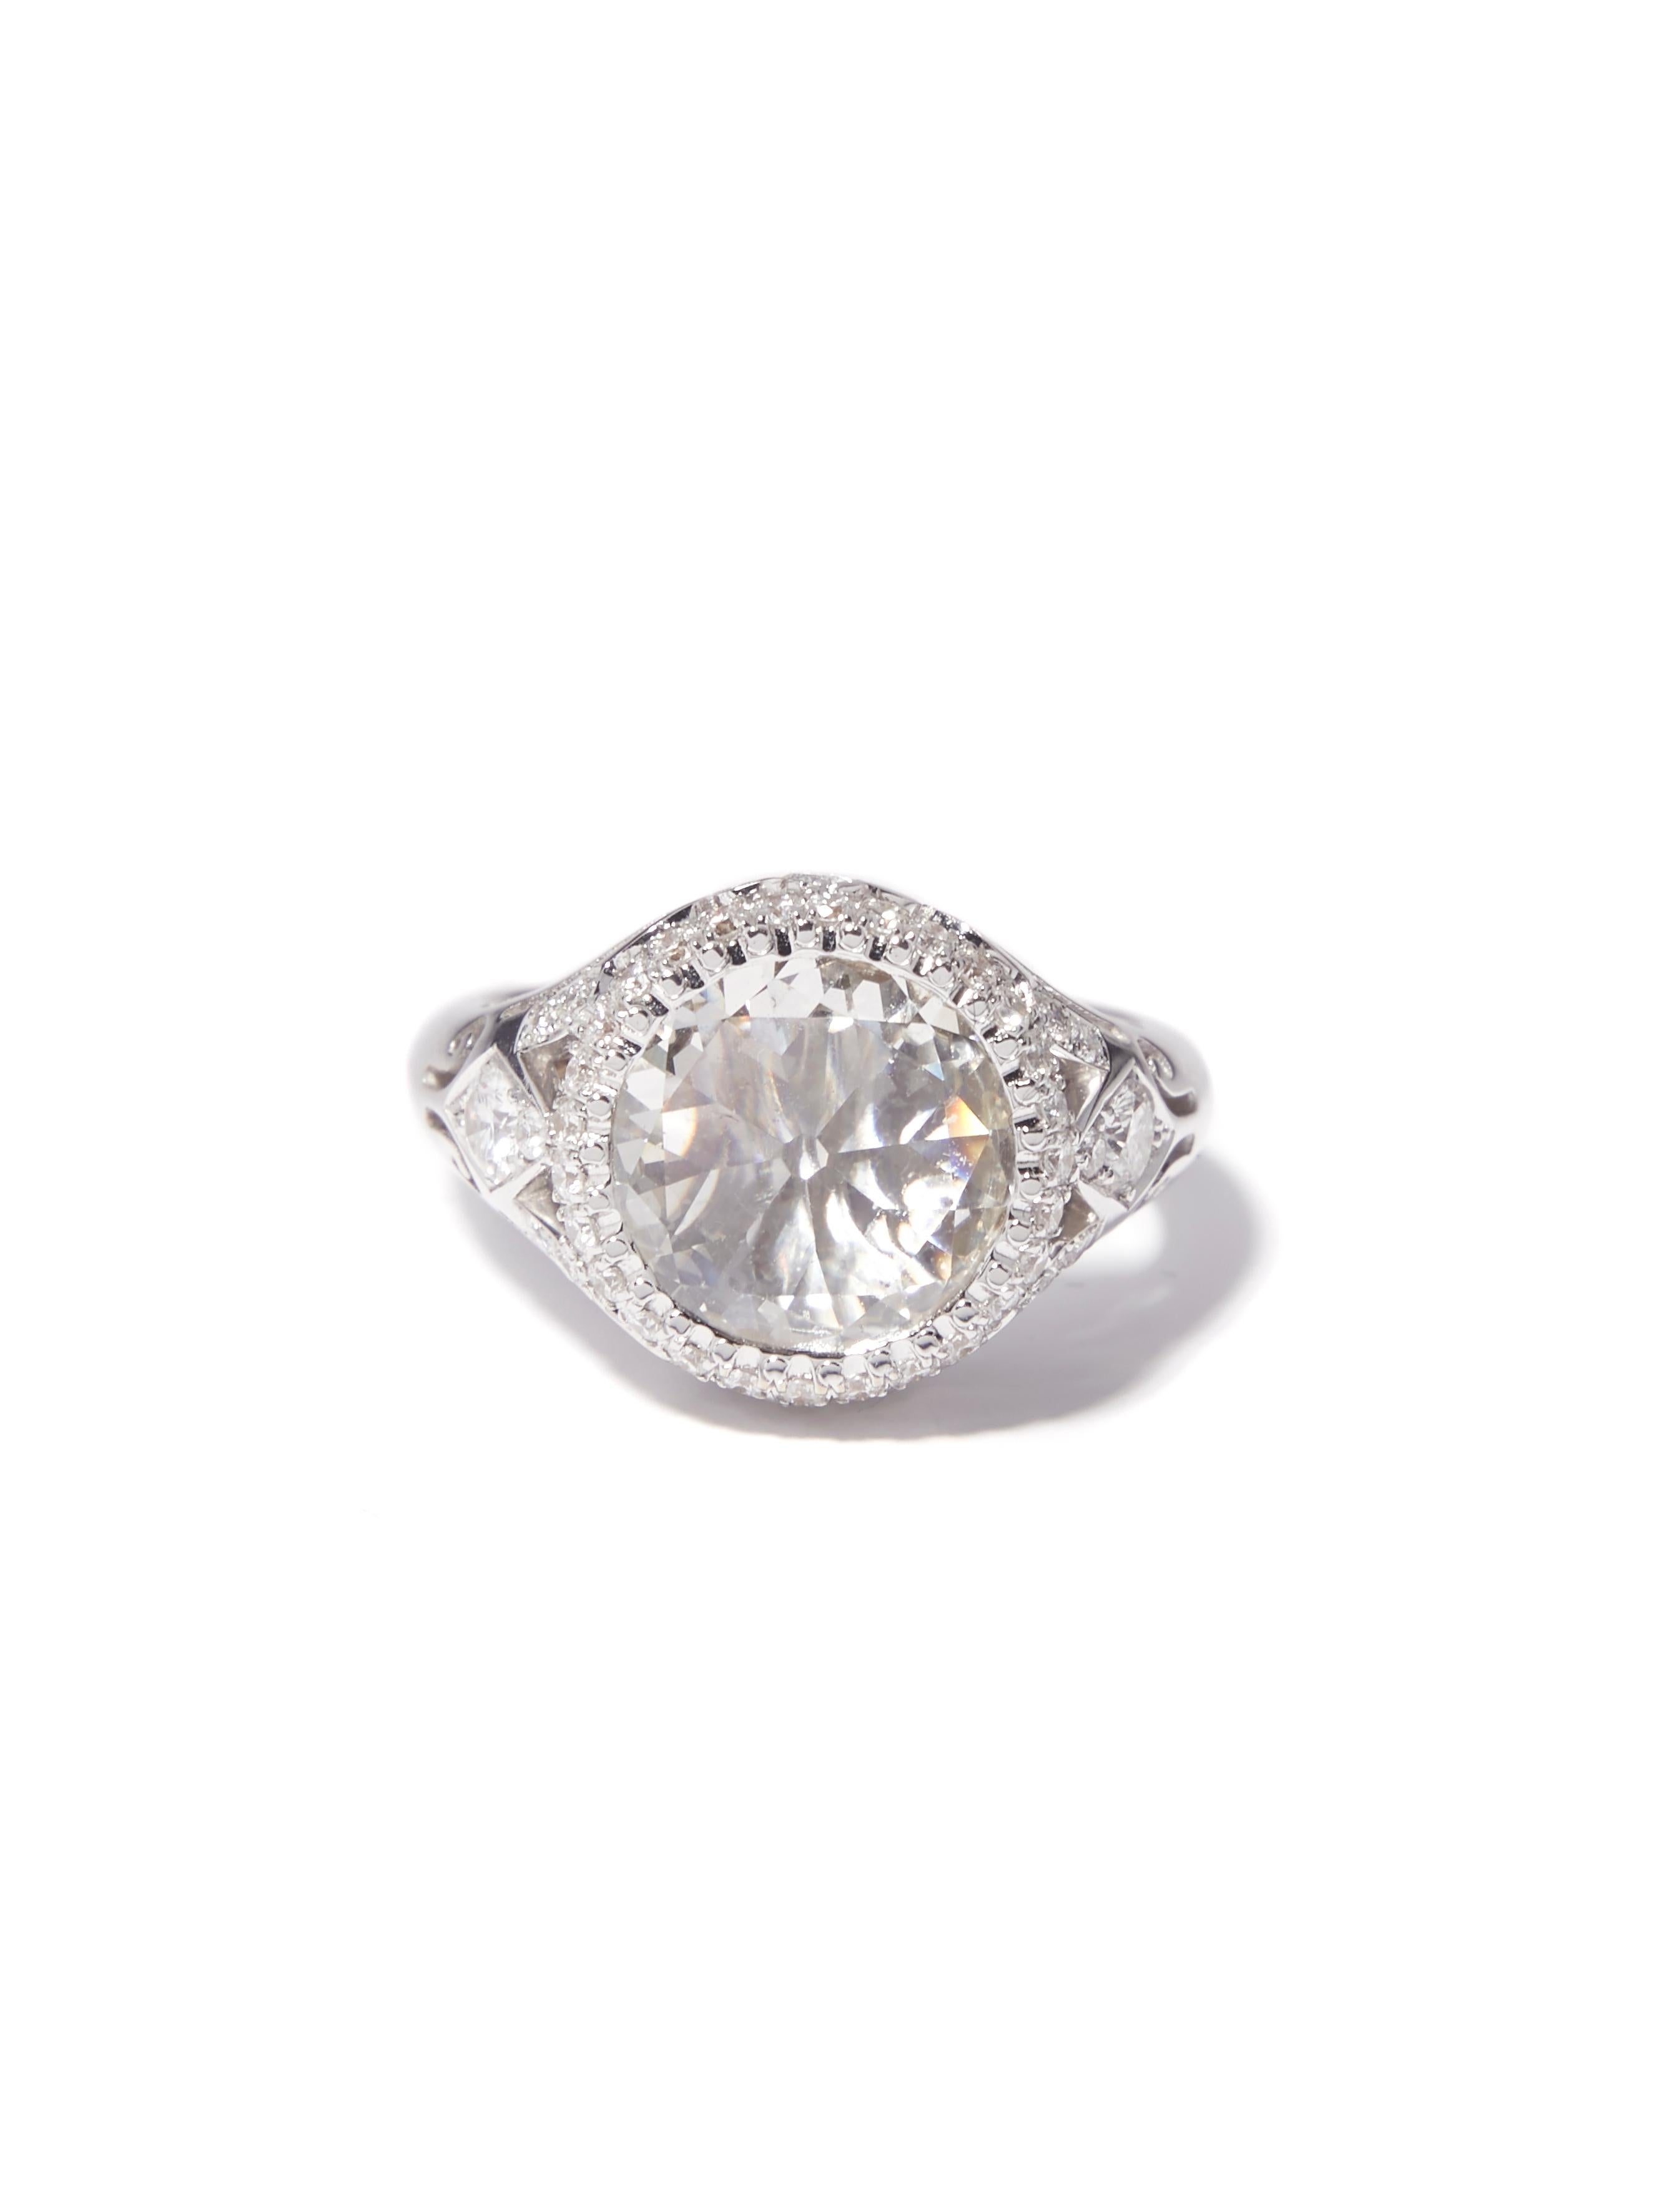 A beautiful well designed Old European cut diamond in a 18kt white gold ring. The Old European round in the center weighs 2.65 carat and is H-VS2 / VS1 in color and clarity. It is set in a basket with 42 brilliant cut diamond around in a G-VS